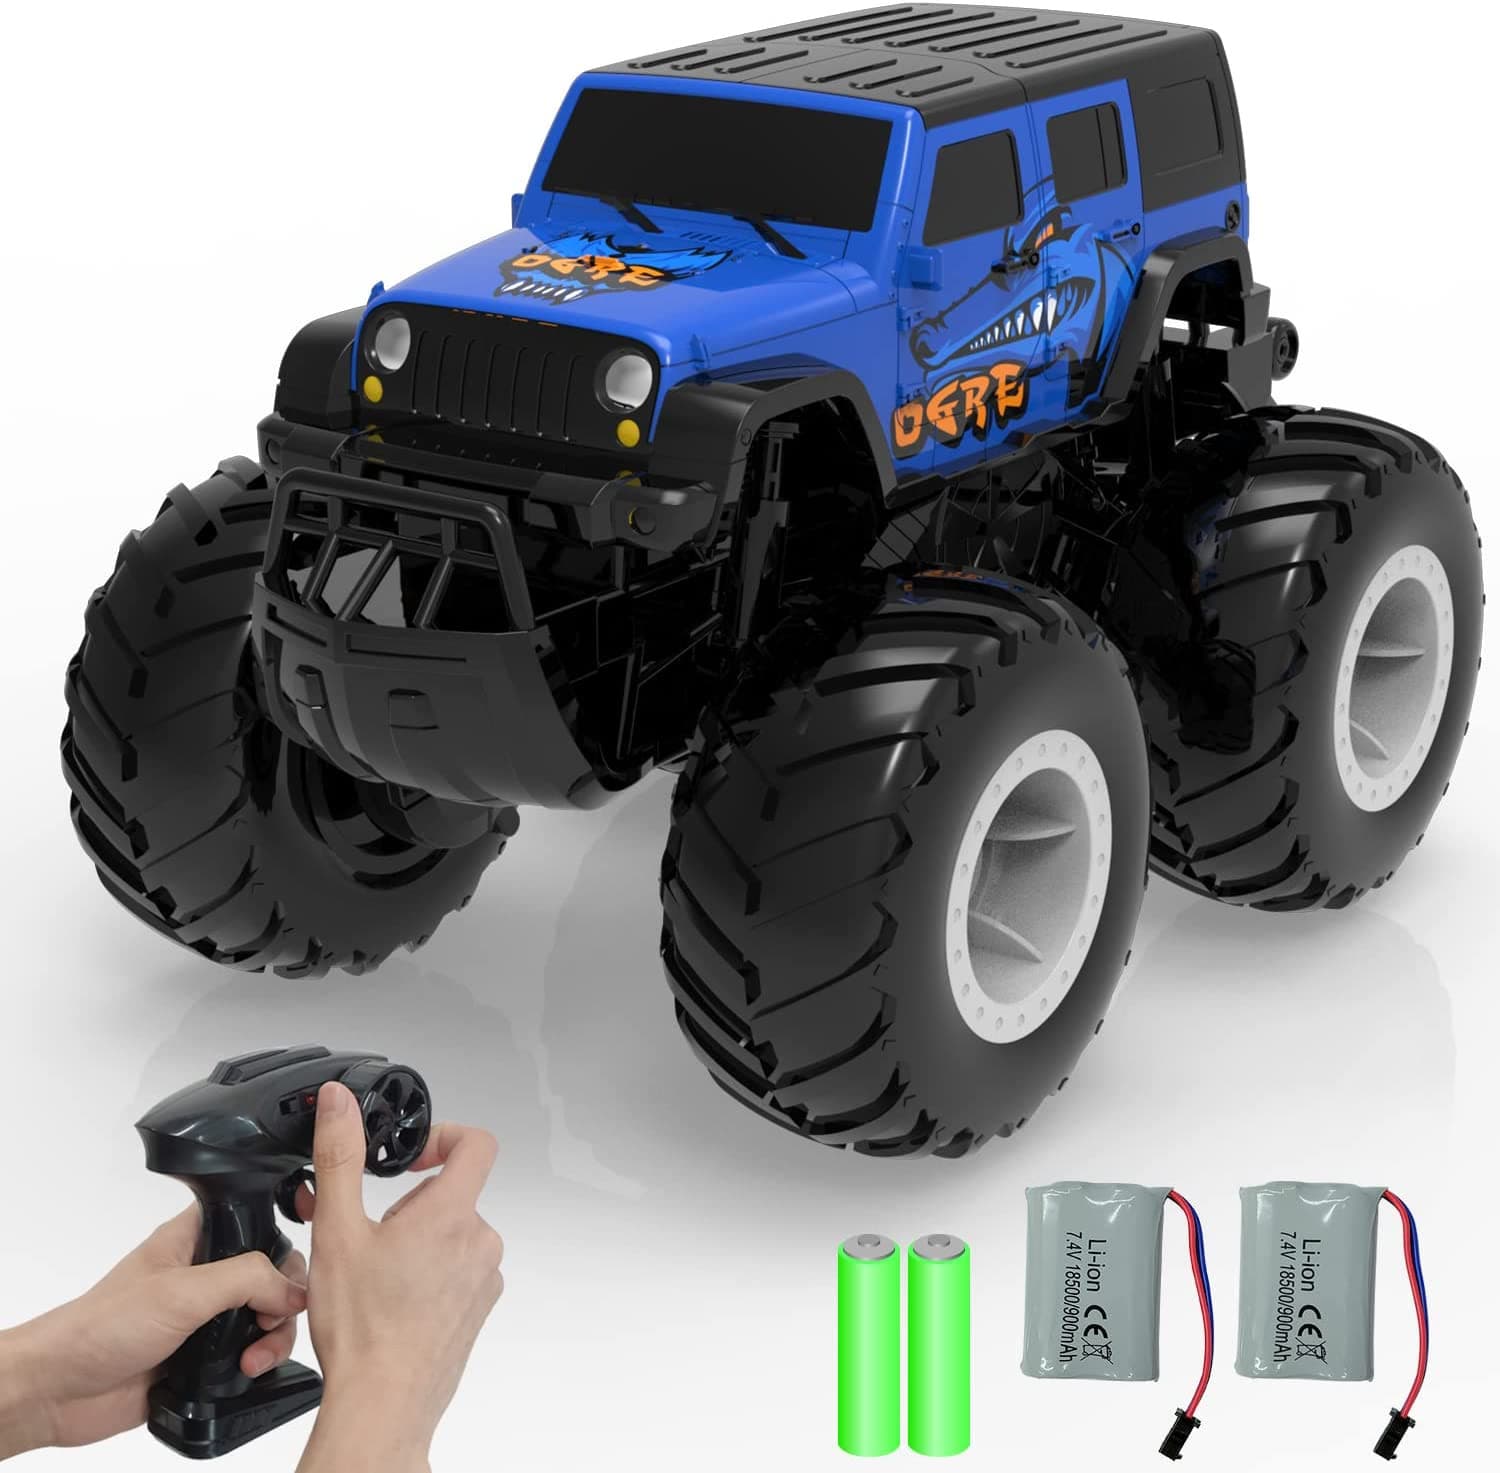 STEMTRON Amphibious Remote Control Monster Truck for Kids | EXHOBBY